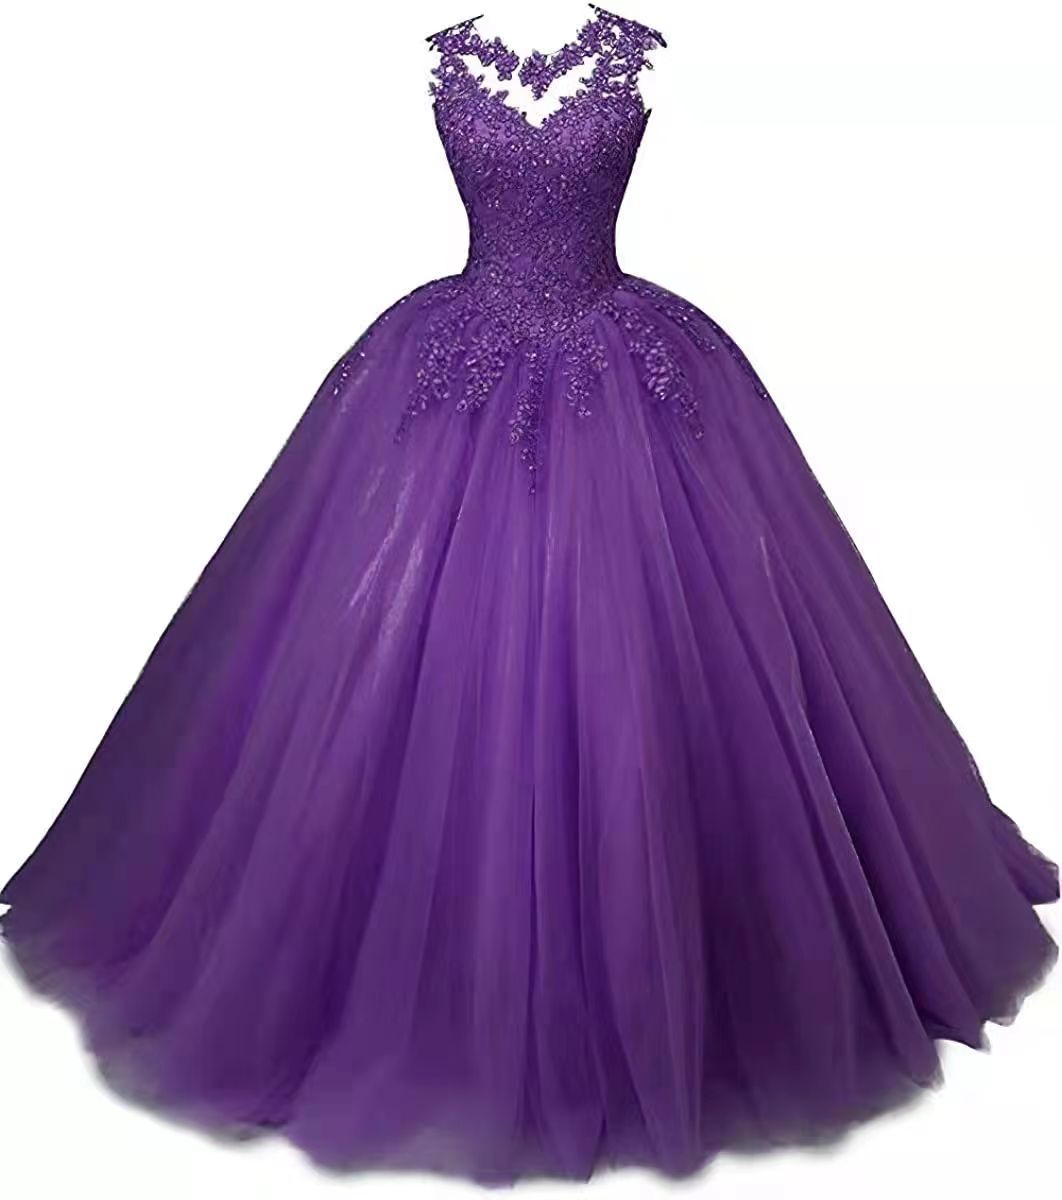 Women Beaded Lace Quinceanera Dresses Sweet 16 Appliques Prom Ball Gown